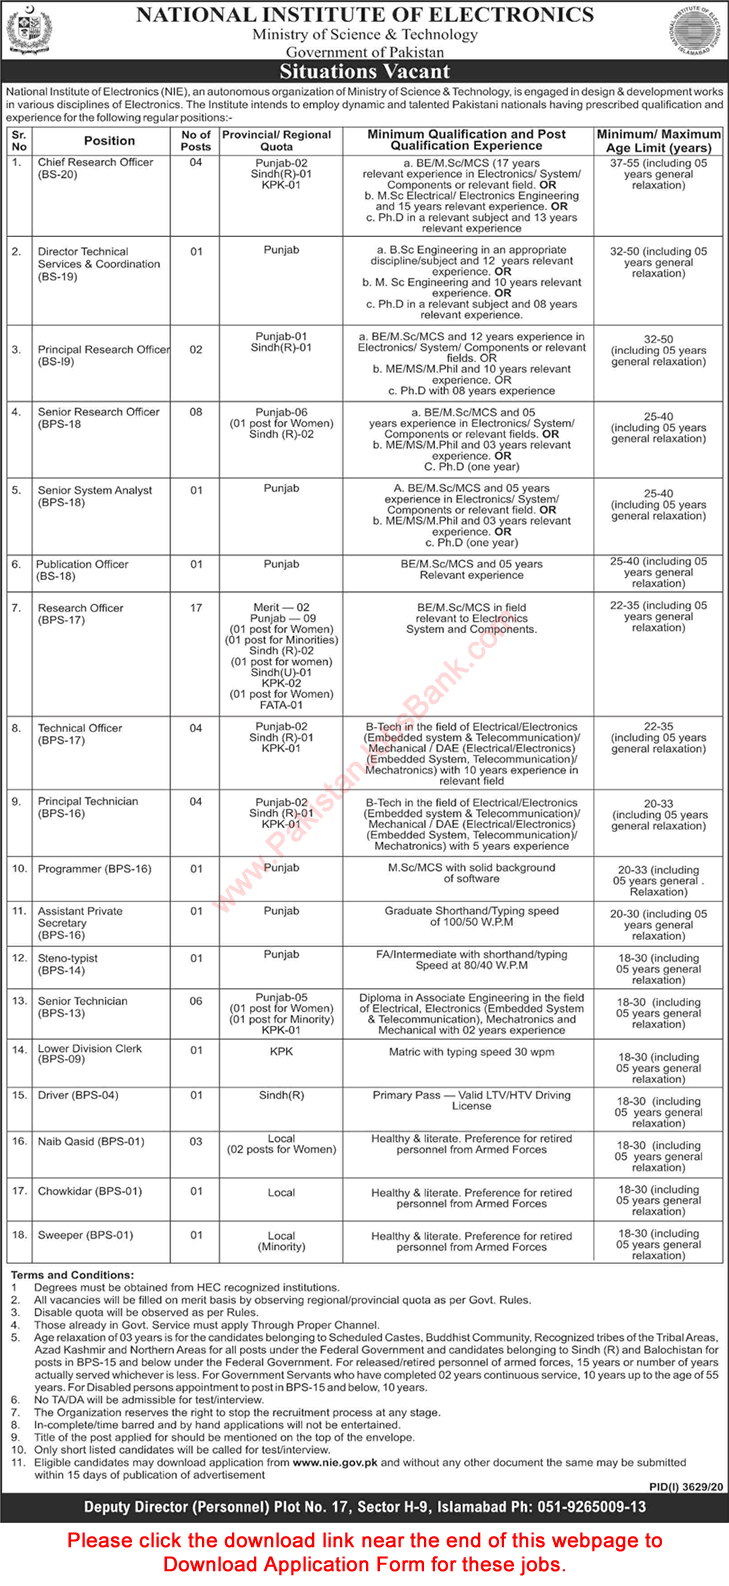 National Institute of Electronics Islamabad Jobs 2021 NIE Application Form Research Officers & Others Latest